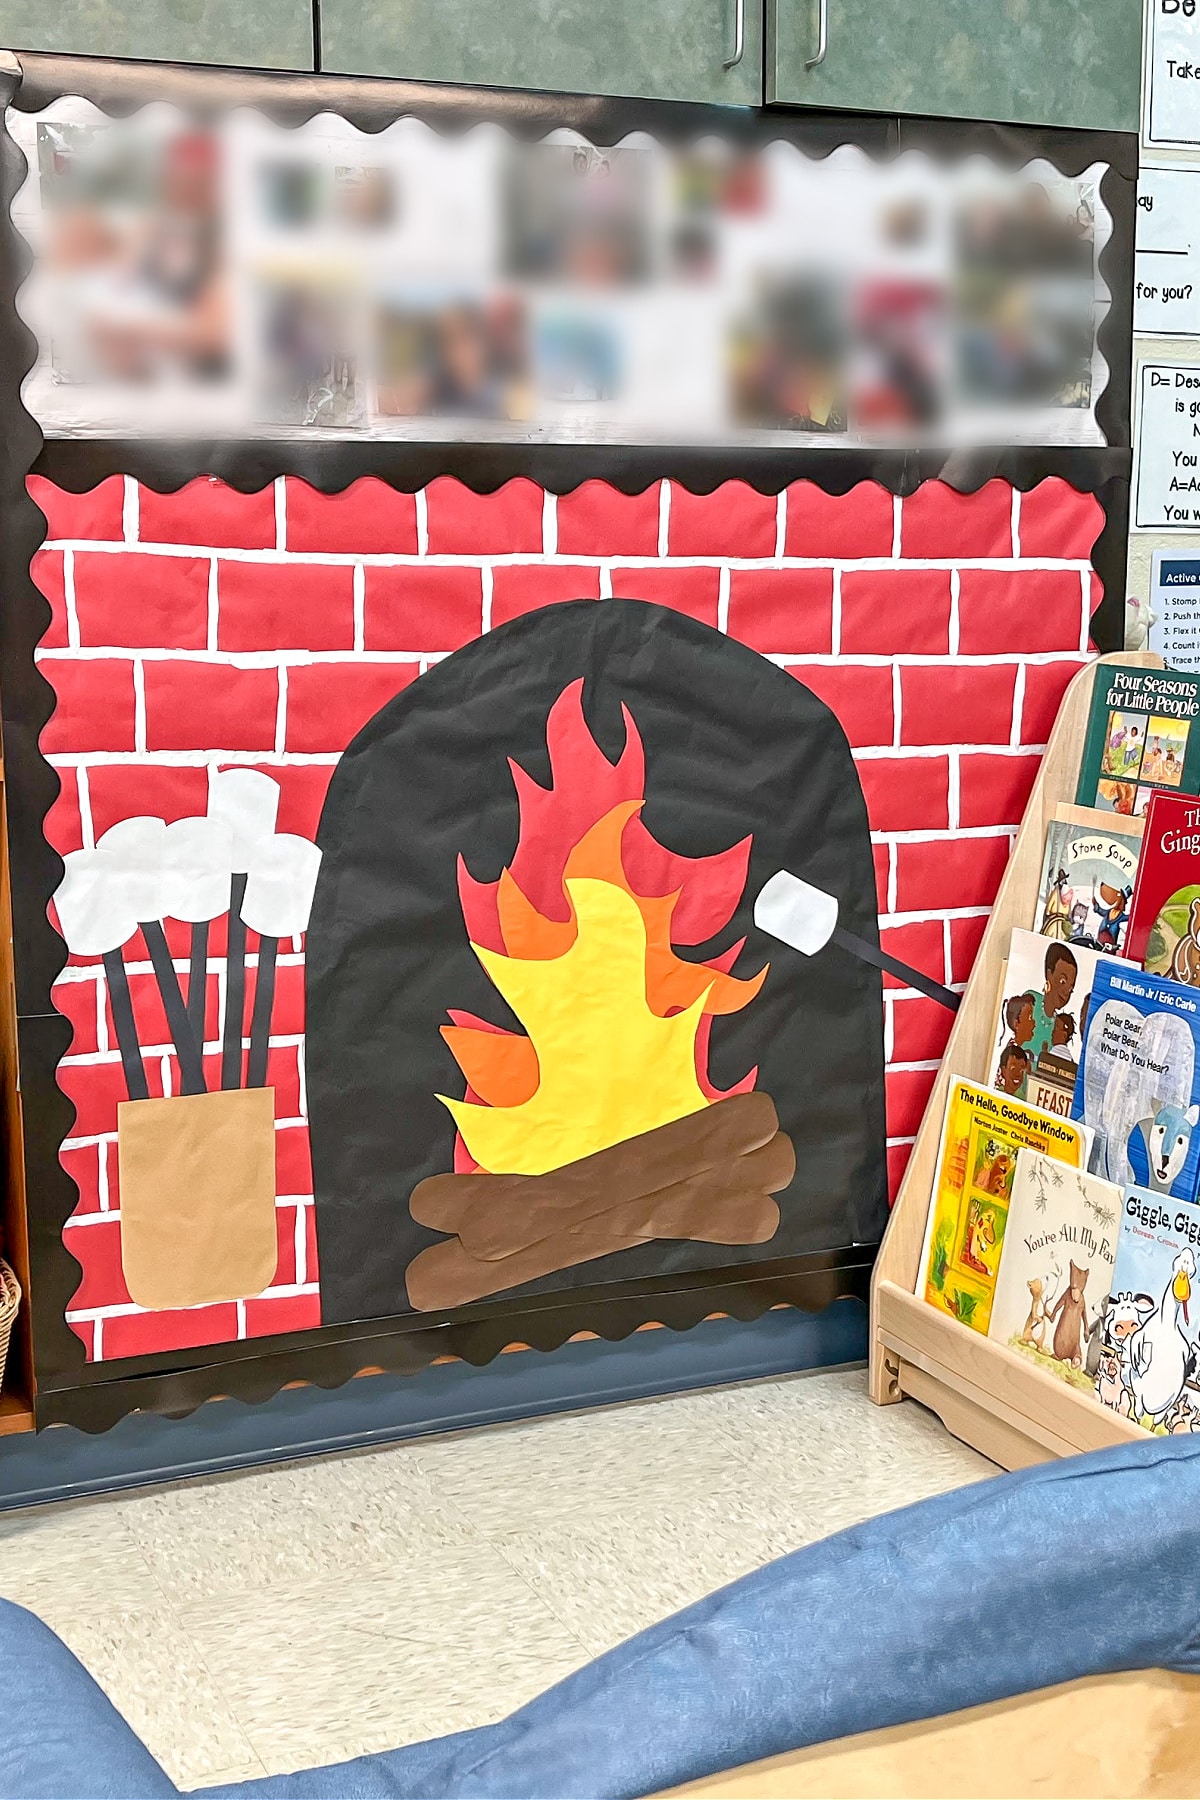 A construction paper fireplace backdrop for a classroom library to make a cozy reading corner for kids